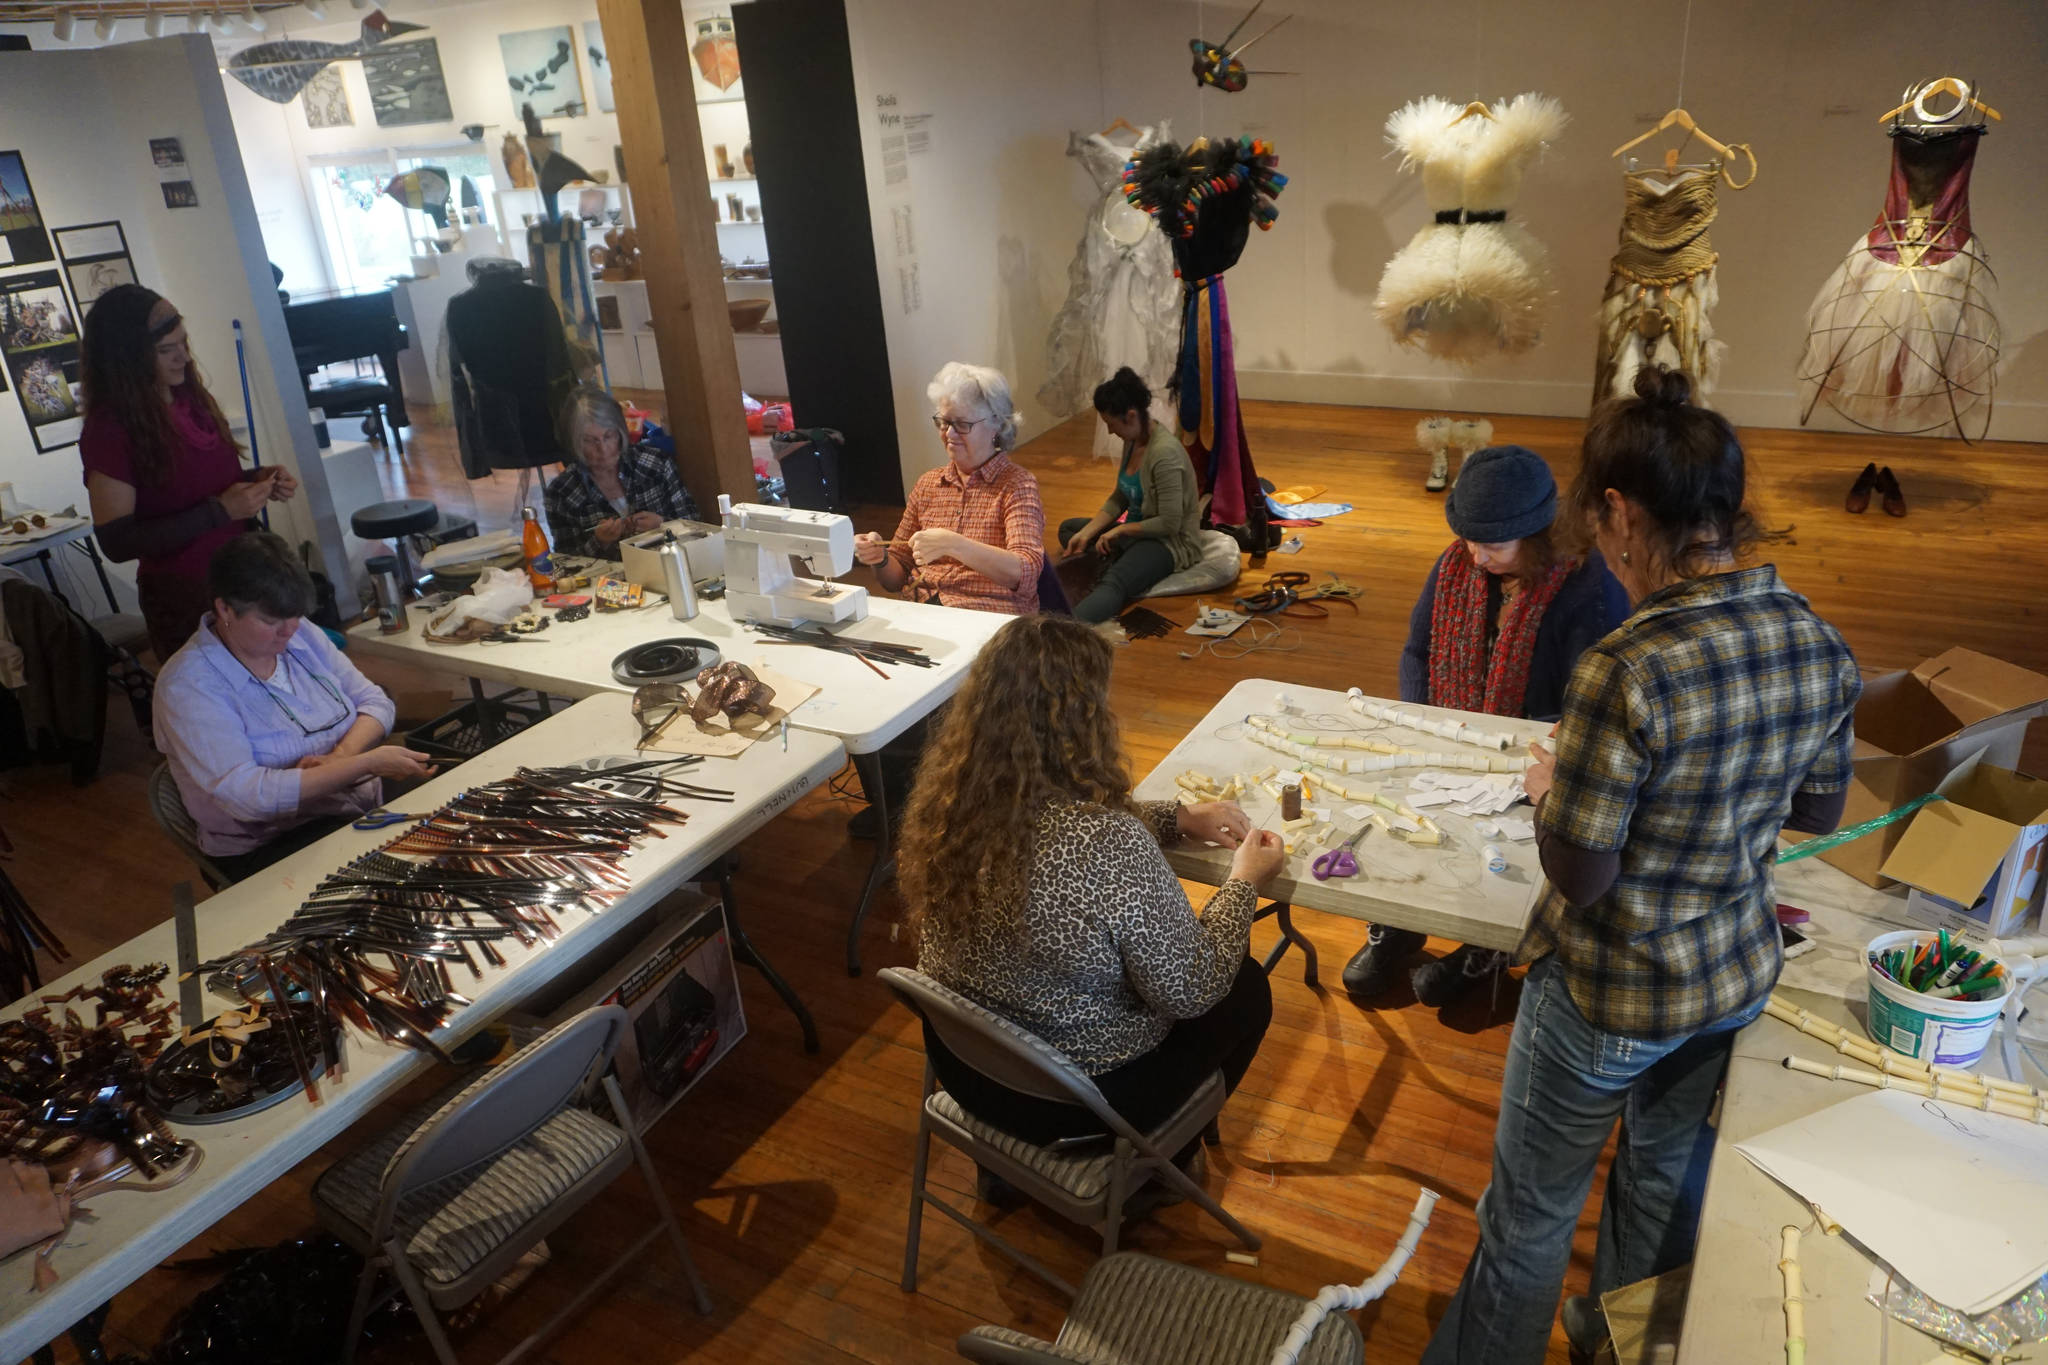 Participants assemble Wearable Arts pieces Saturday, Oct. 14, 2017 at a workshop with Sheila Wyne at the Bunnell Street Arts Center in Homer, Alaska. Wyne is artist in residence at Bunnell at a residency sponsored by the Homer Fiber Arts Collective. (Photo by Michael Armstrong)